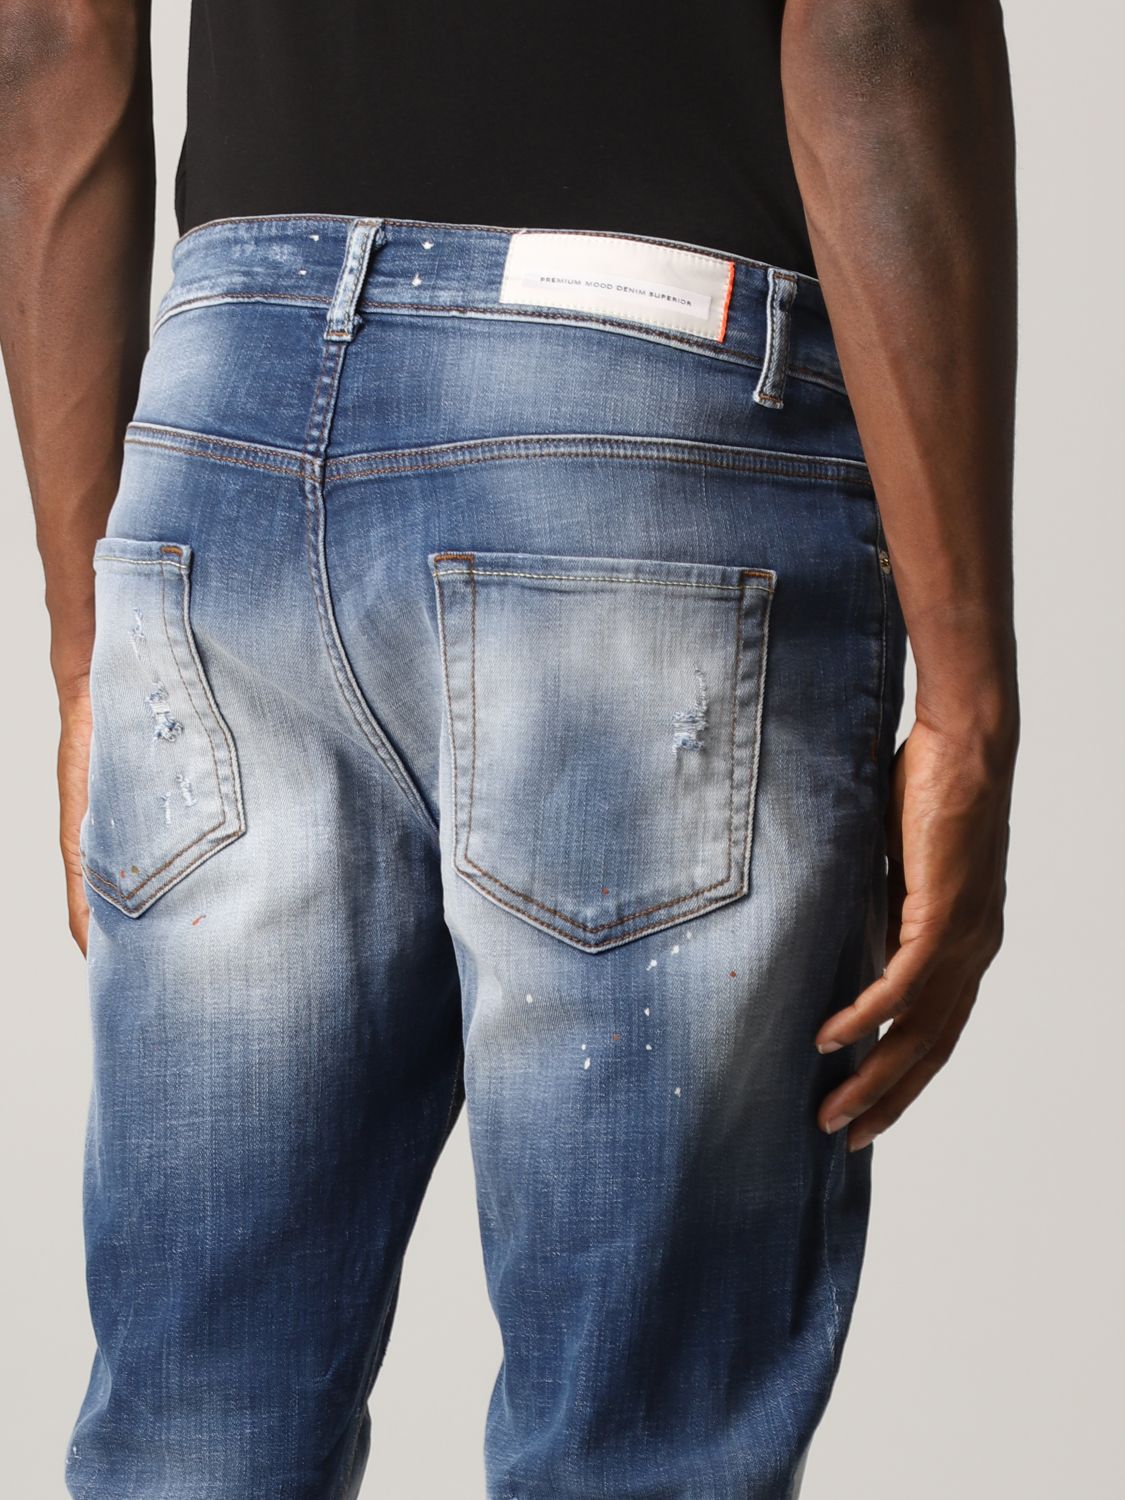 Jeans Pmds: Jeans men Pmds stone washed 3